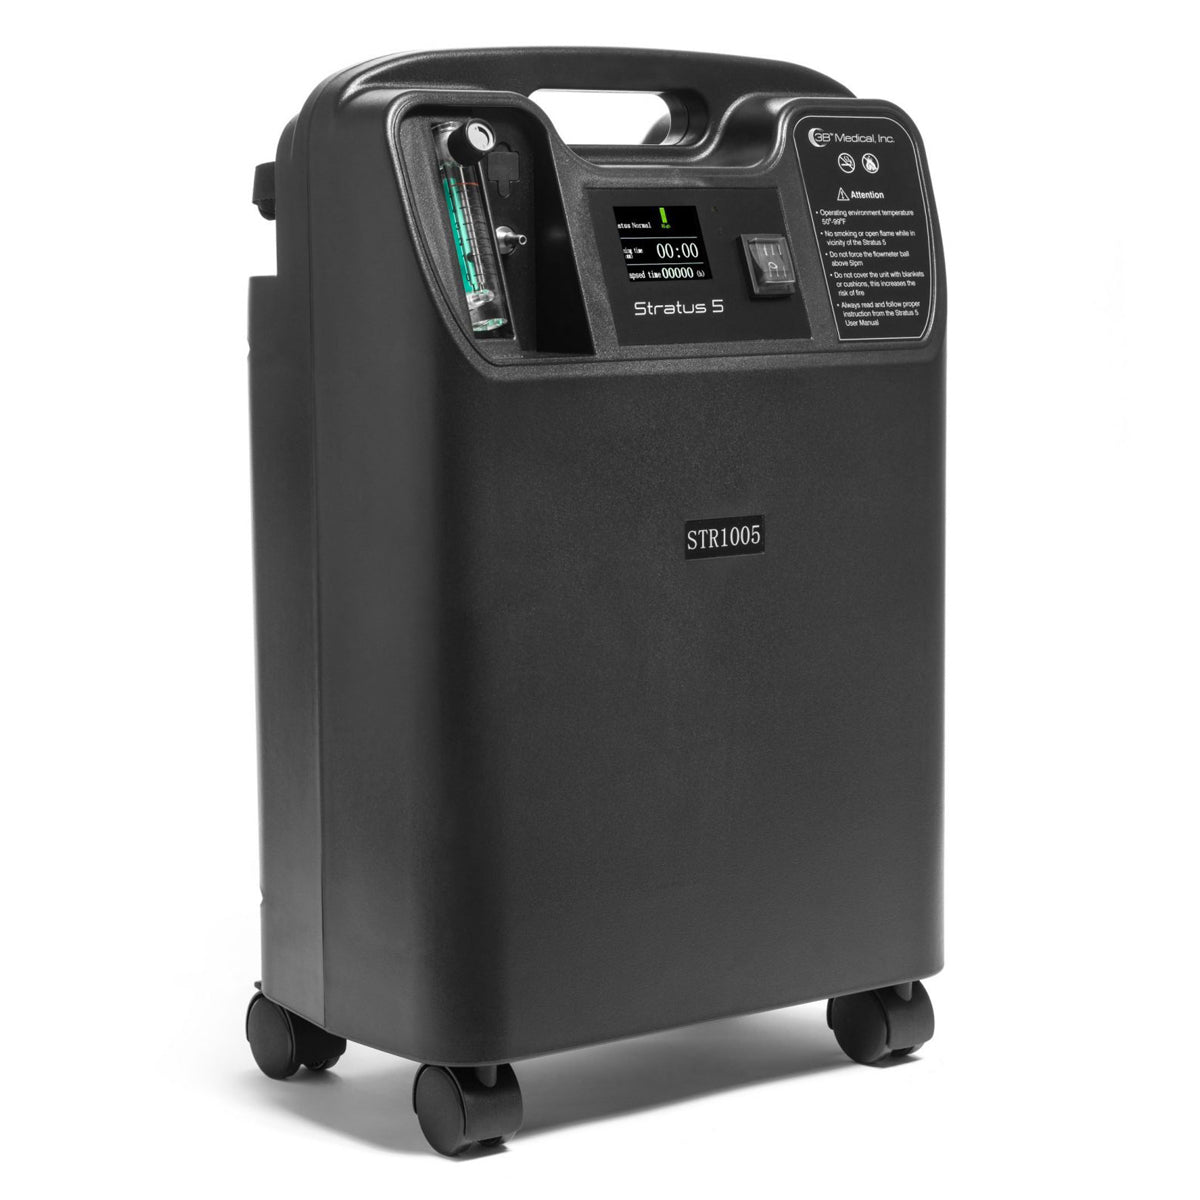 3B Medical Stratus 5 Stationary Oxygen Concentrator - New